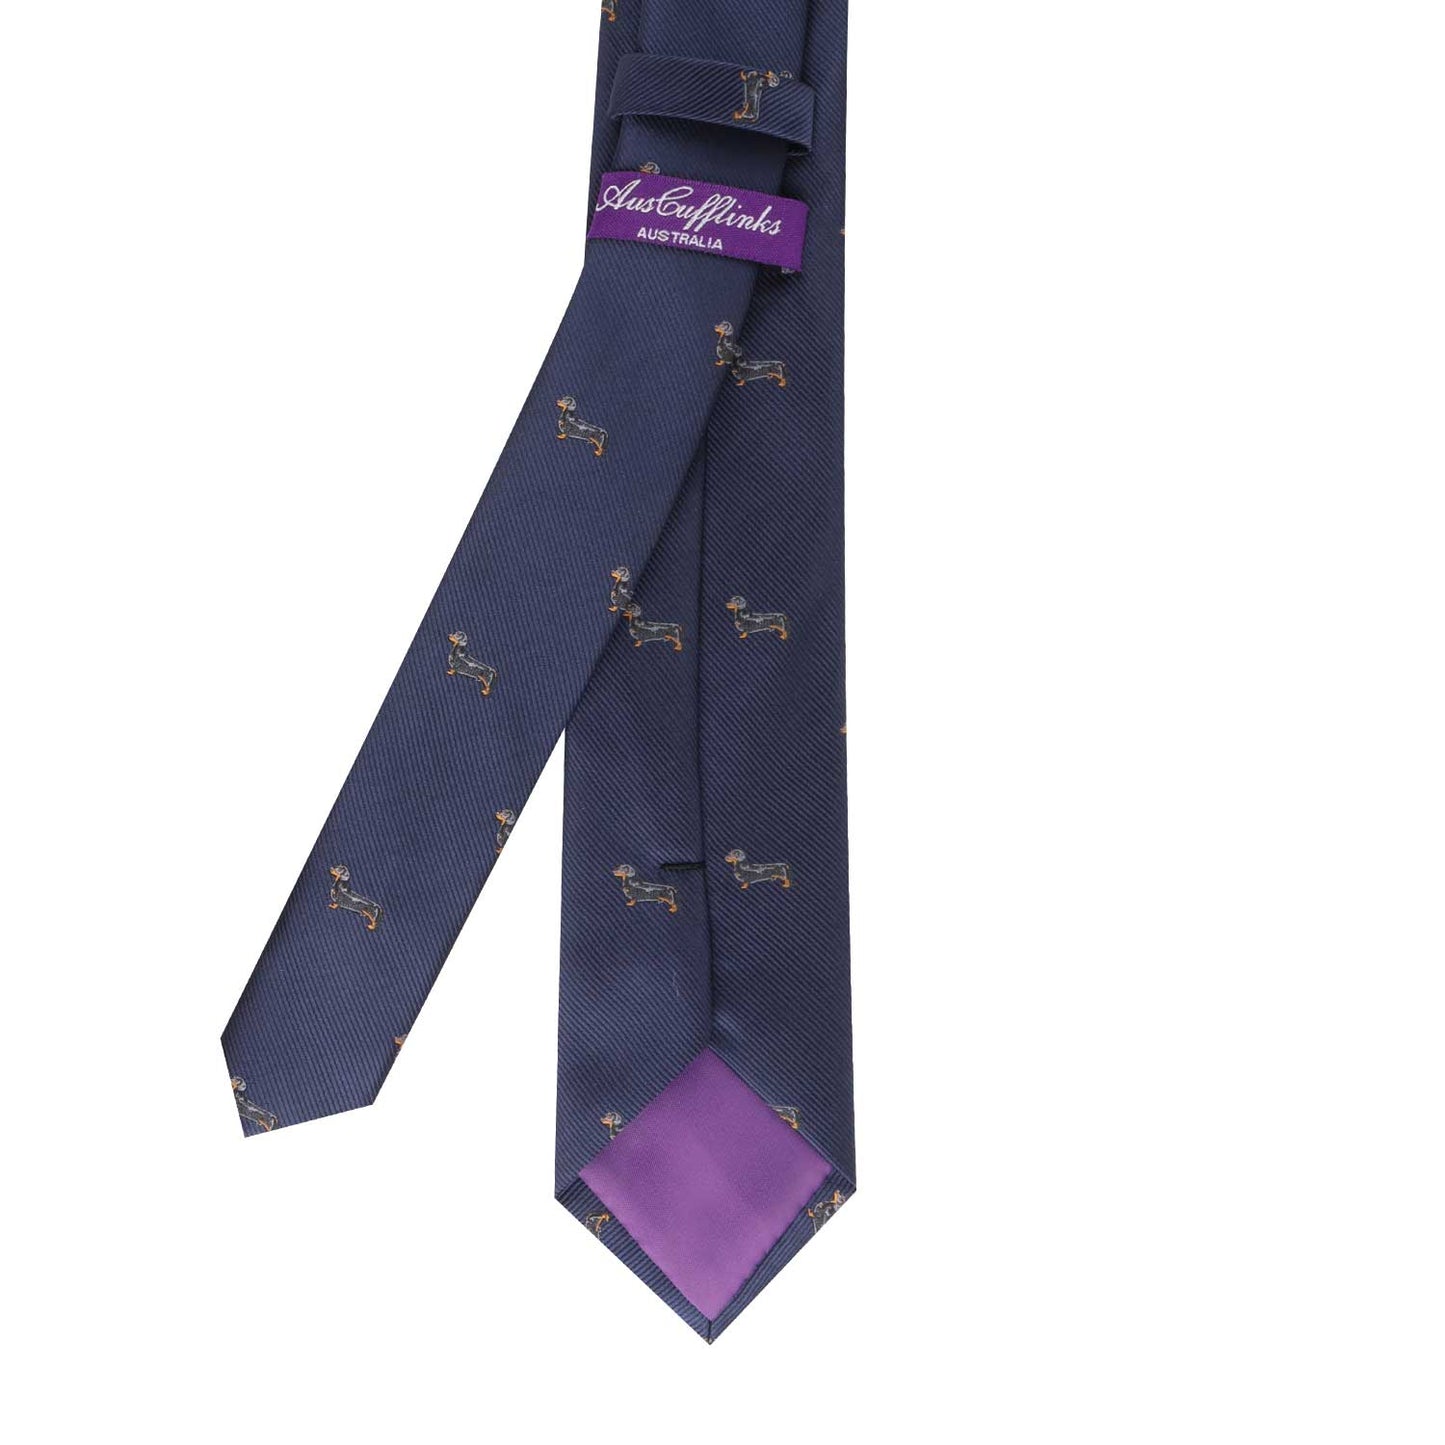 A charming Sausage Dog Skinny Tie with a playful horse print for a quirky look.